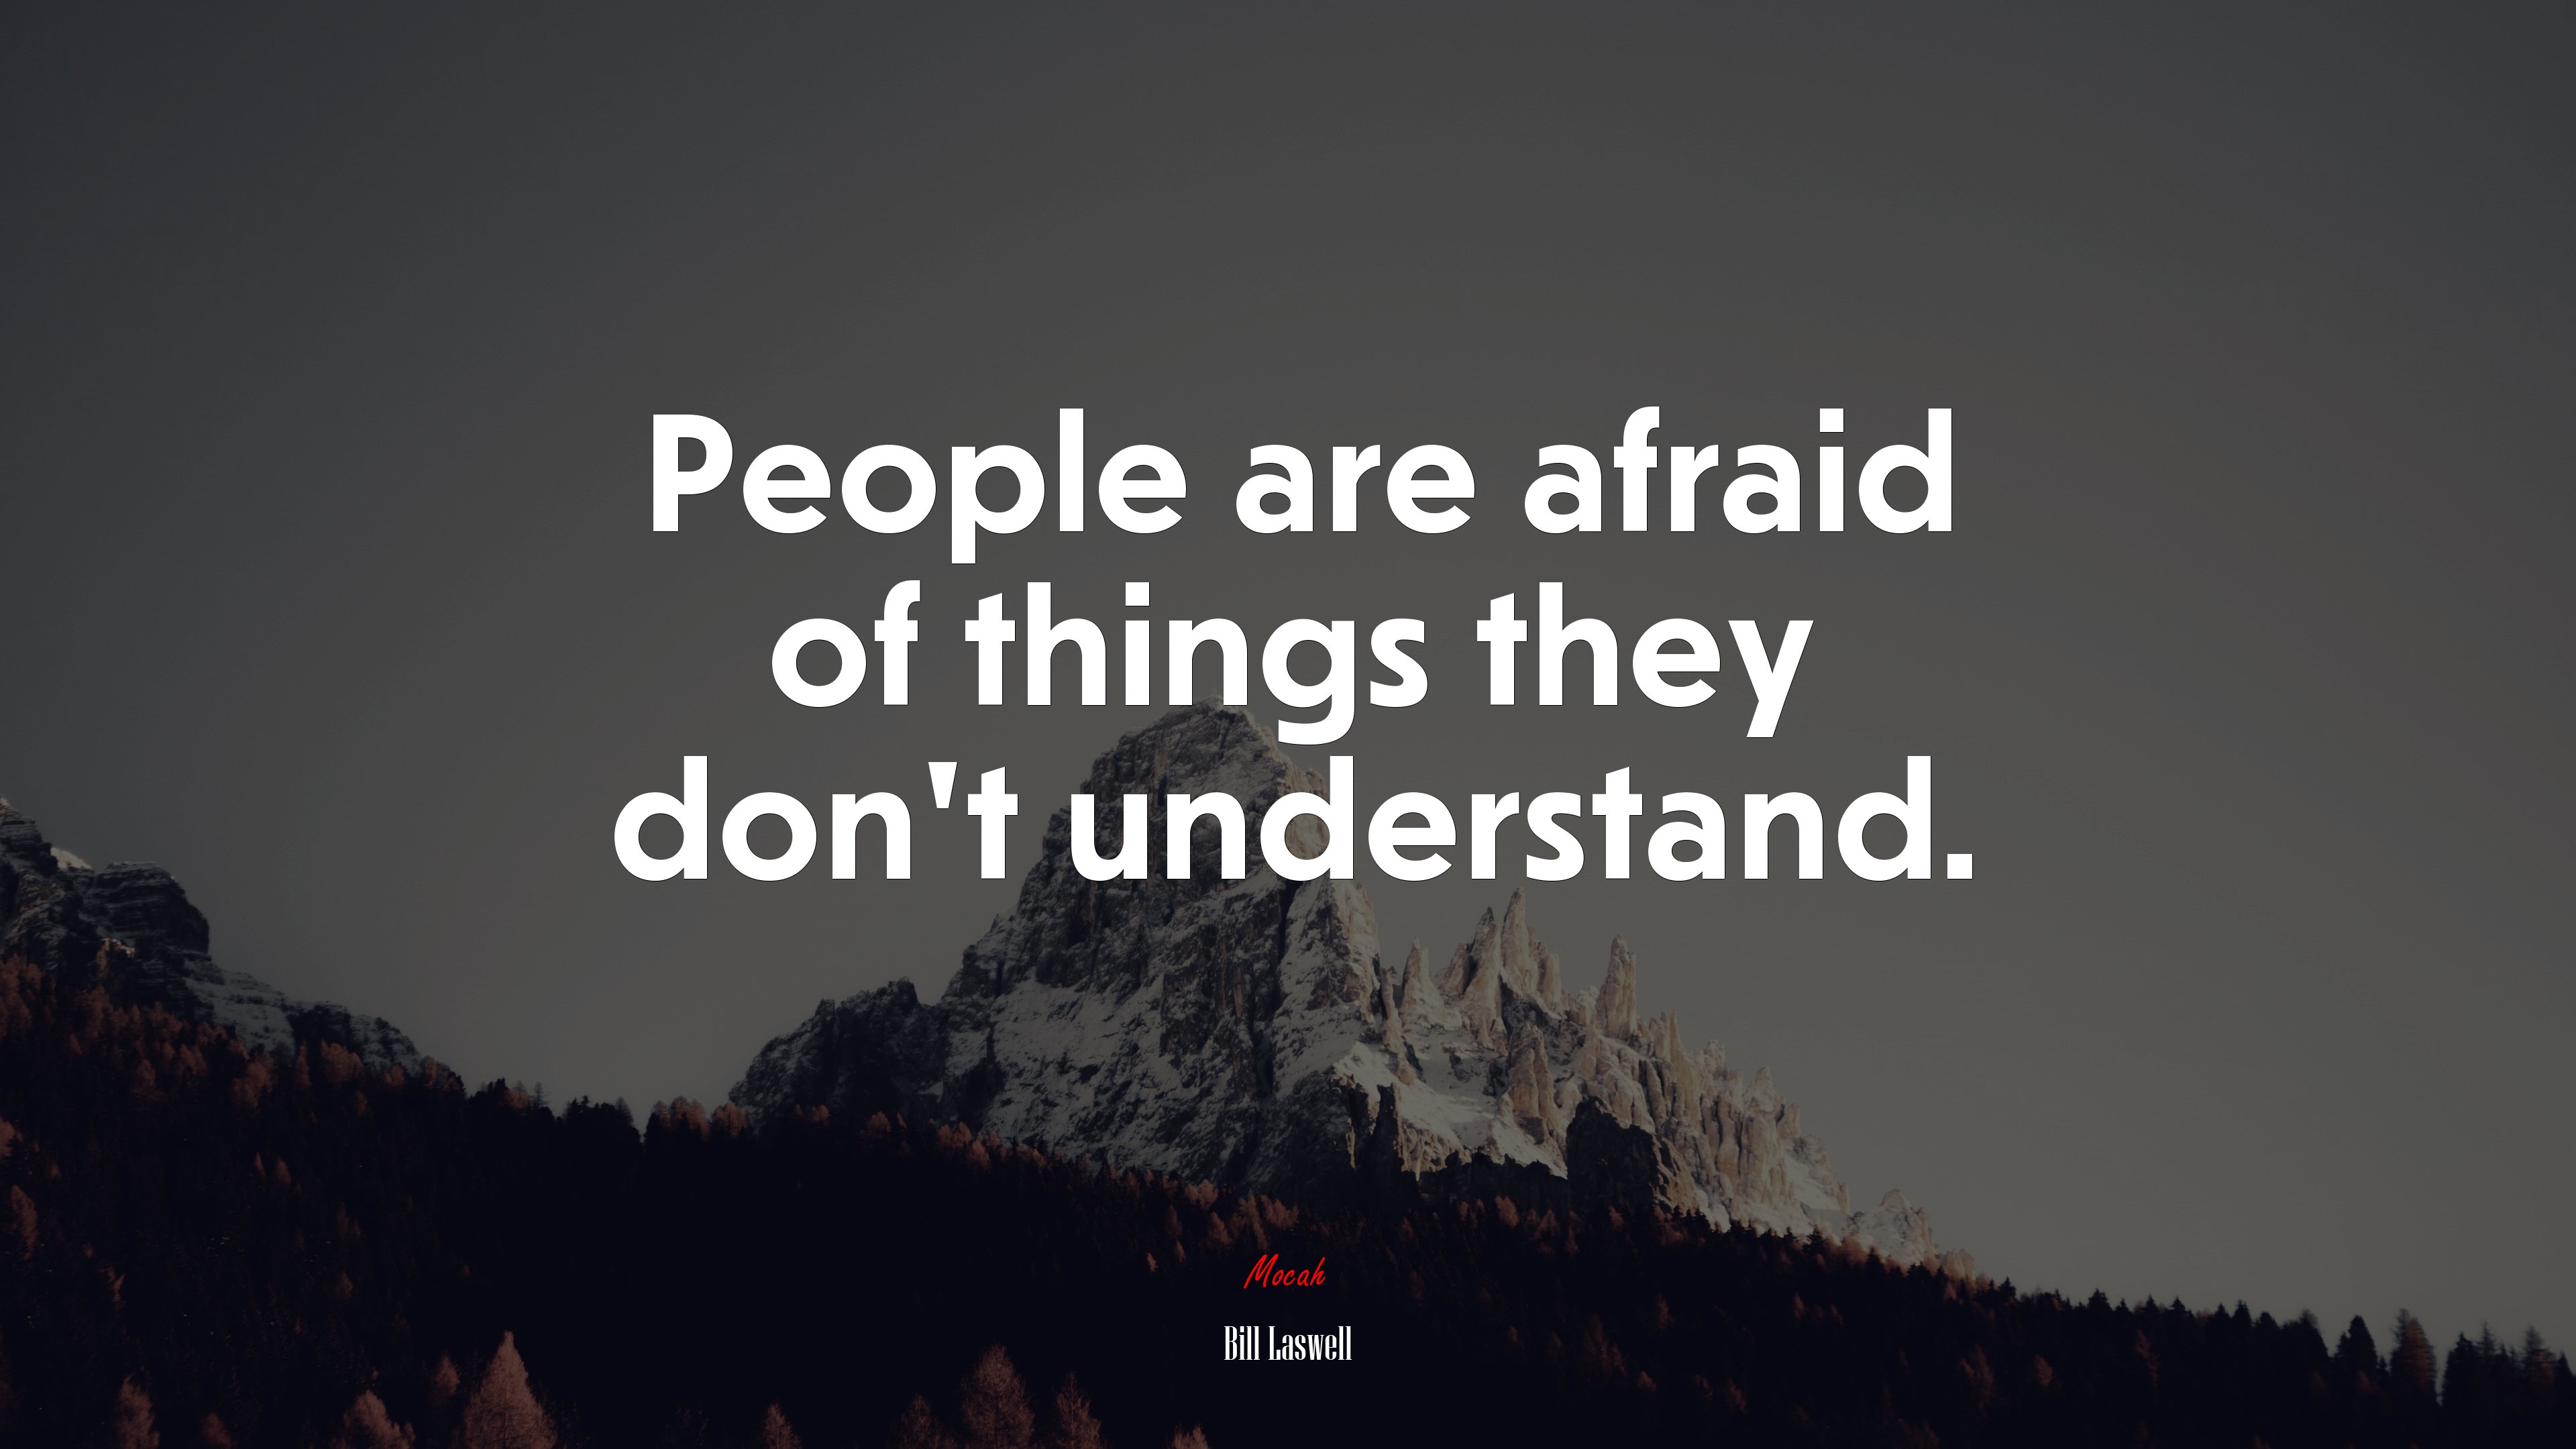 People are afraid of things they dont understand bill laswell quote